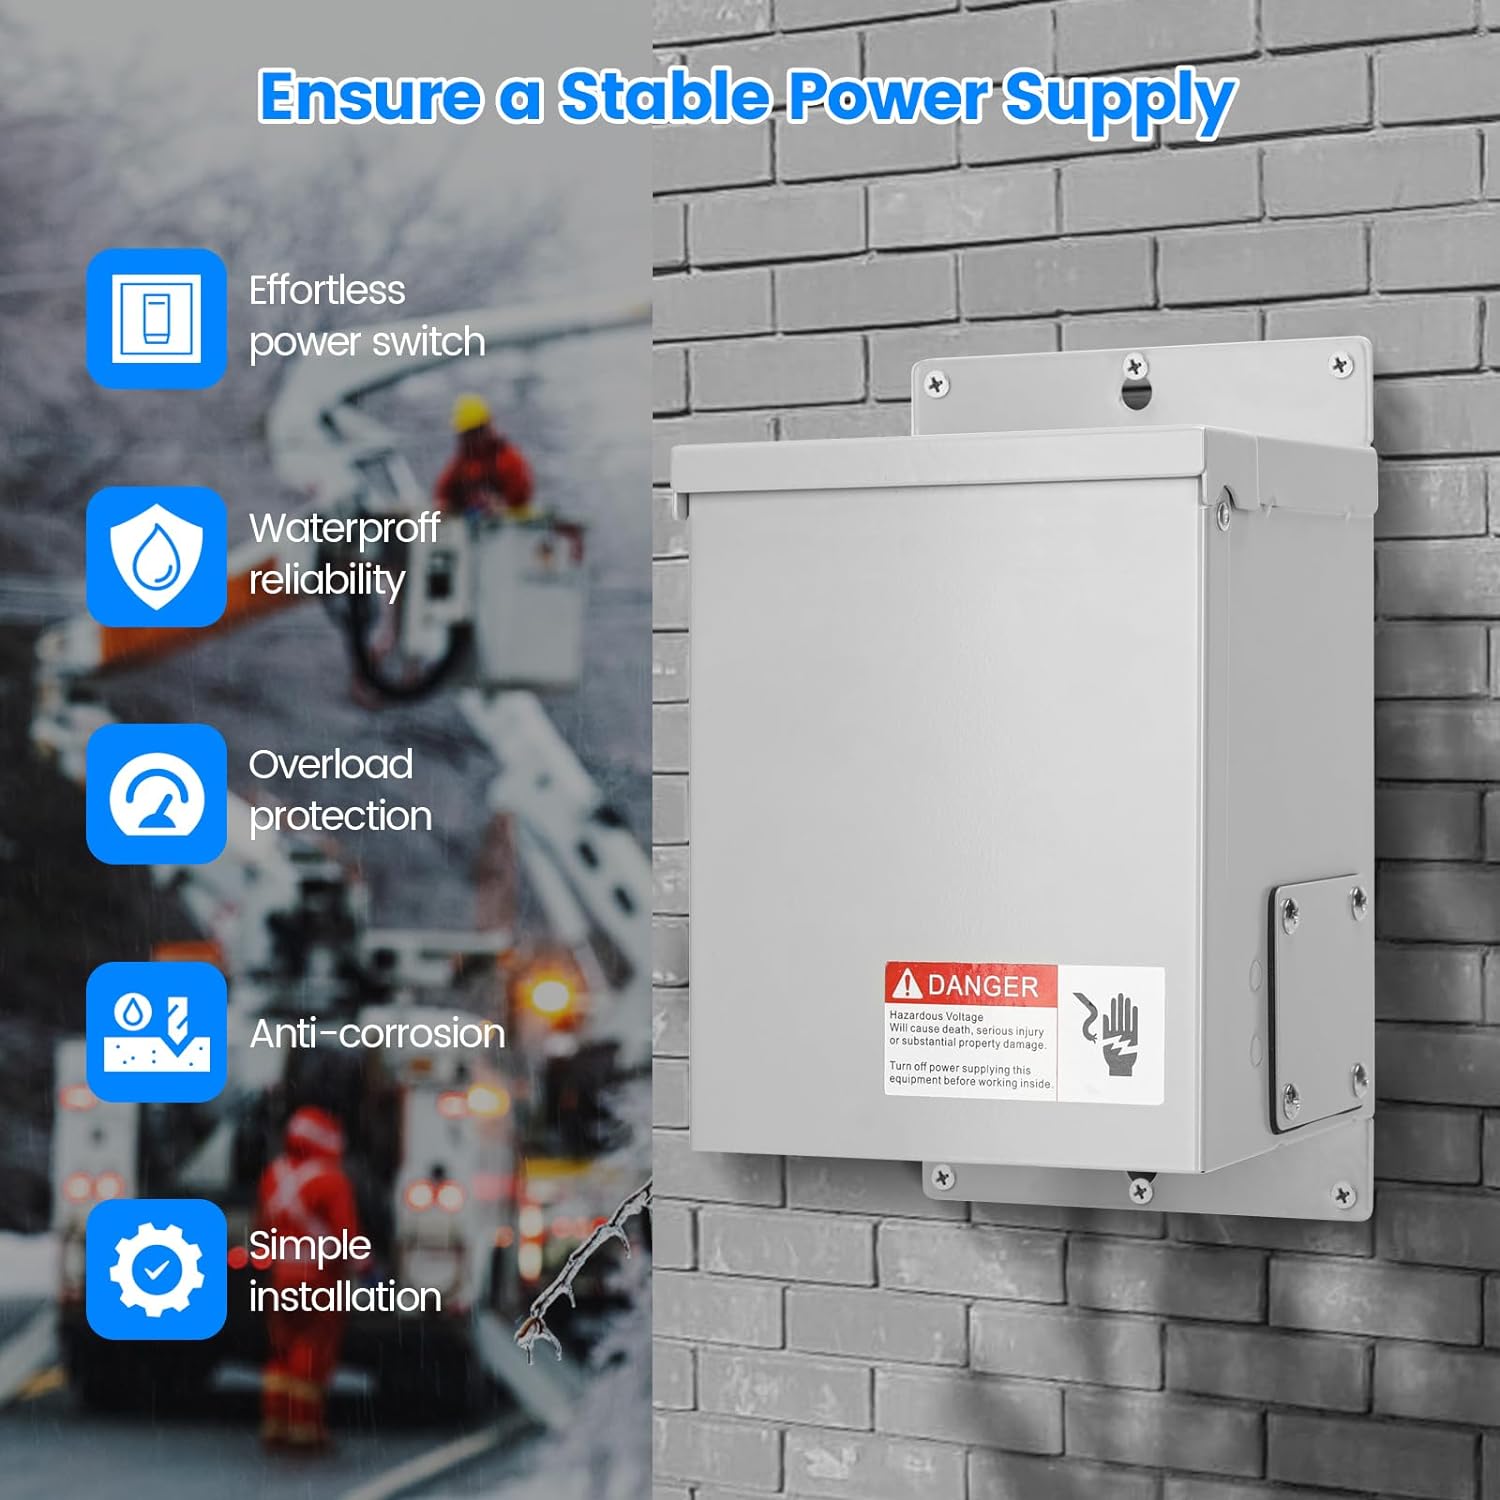 Indoor & Outdoor Briidea Generator Manual Transfer Switches, Waterproof Flip Cover, 15 Amp 125V Over Load Protection with Circuit Breaker, 4 Pre-Drilled Holes, Be Ready for The Next Power Outage